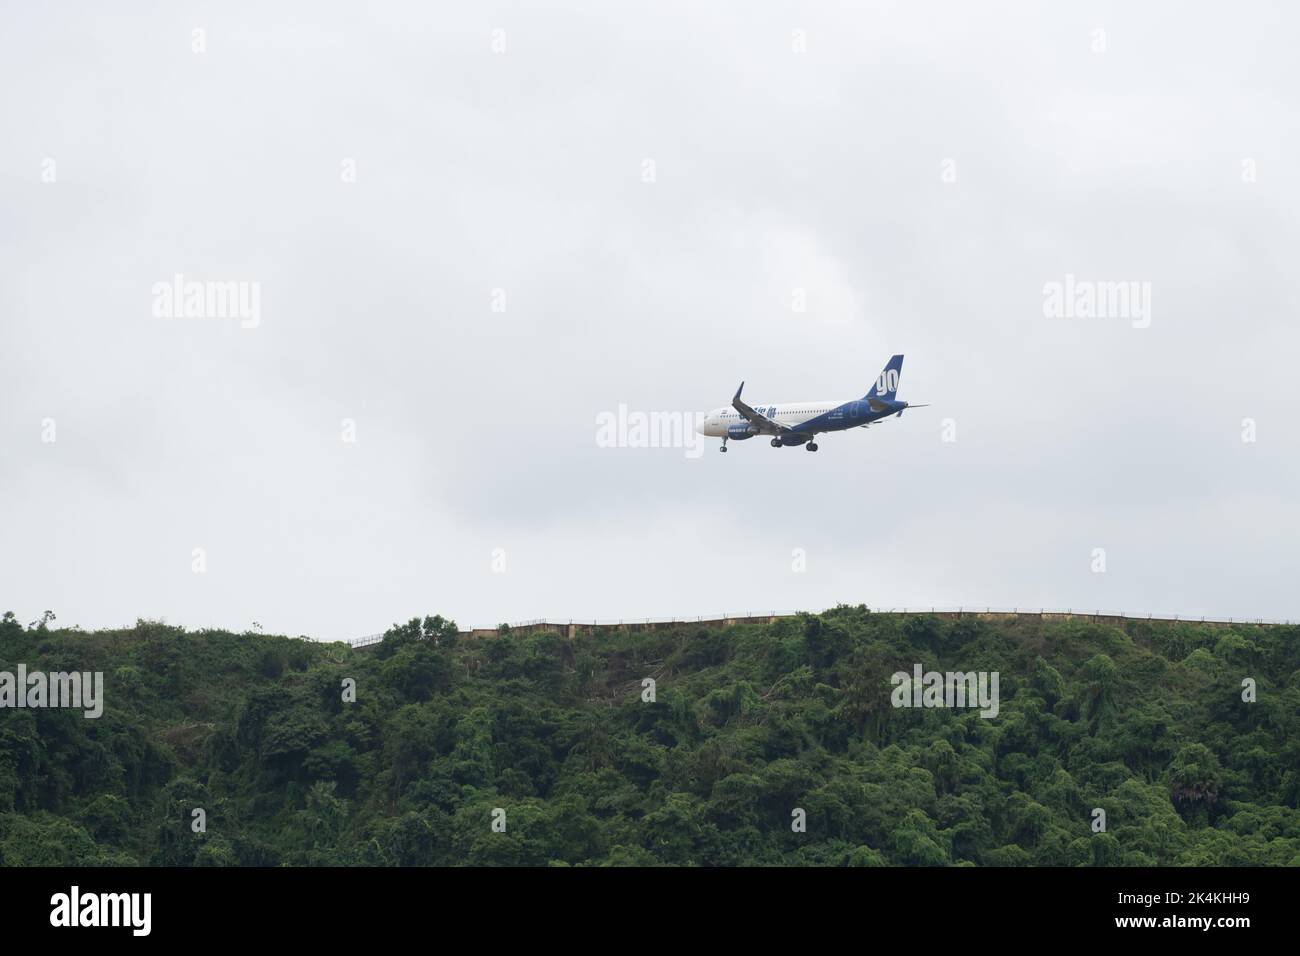 Mangalore, India - 3rd August, 2022 : An Go Air Airbus A320 flight coming in for landing at the dangerous tabletop runway of the Mangaluru Internation Stock Photo